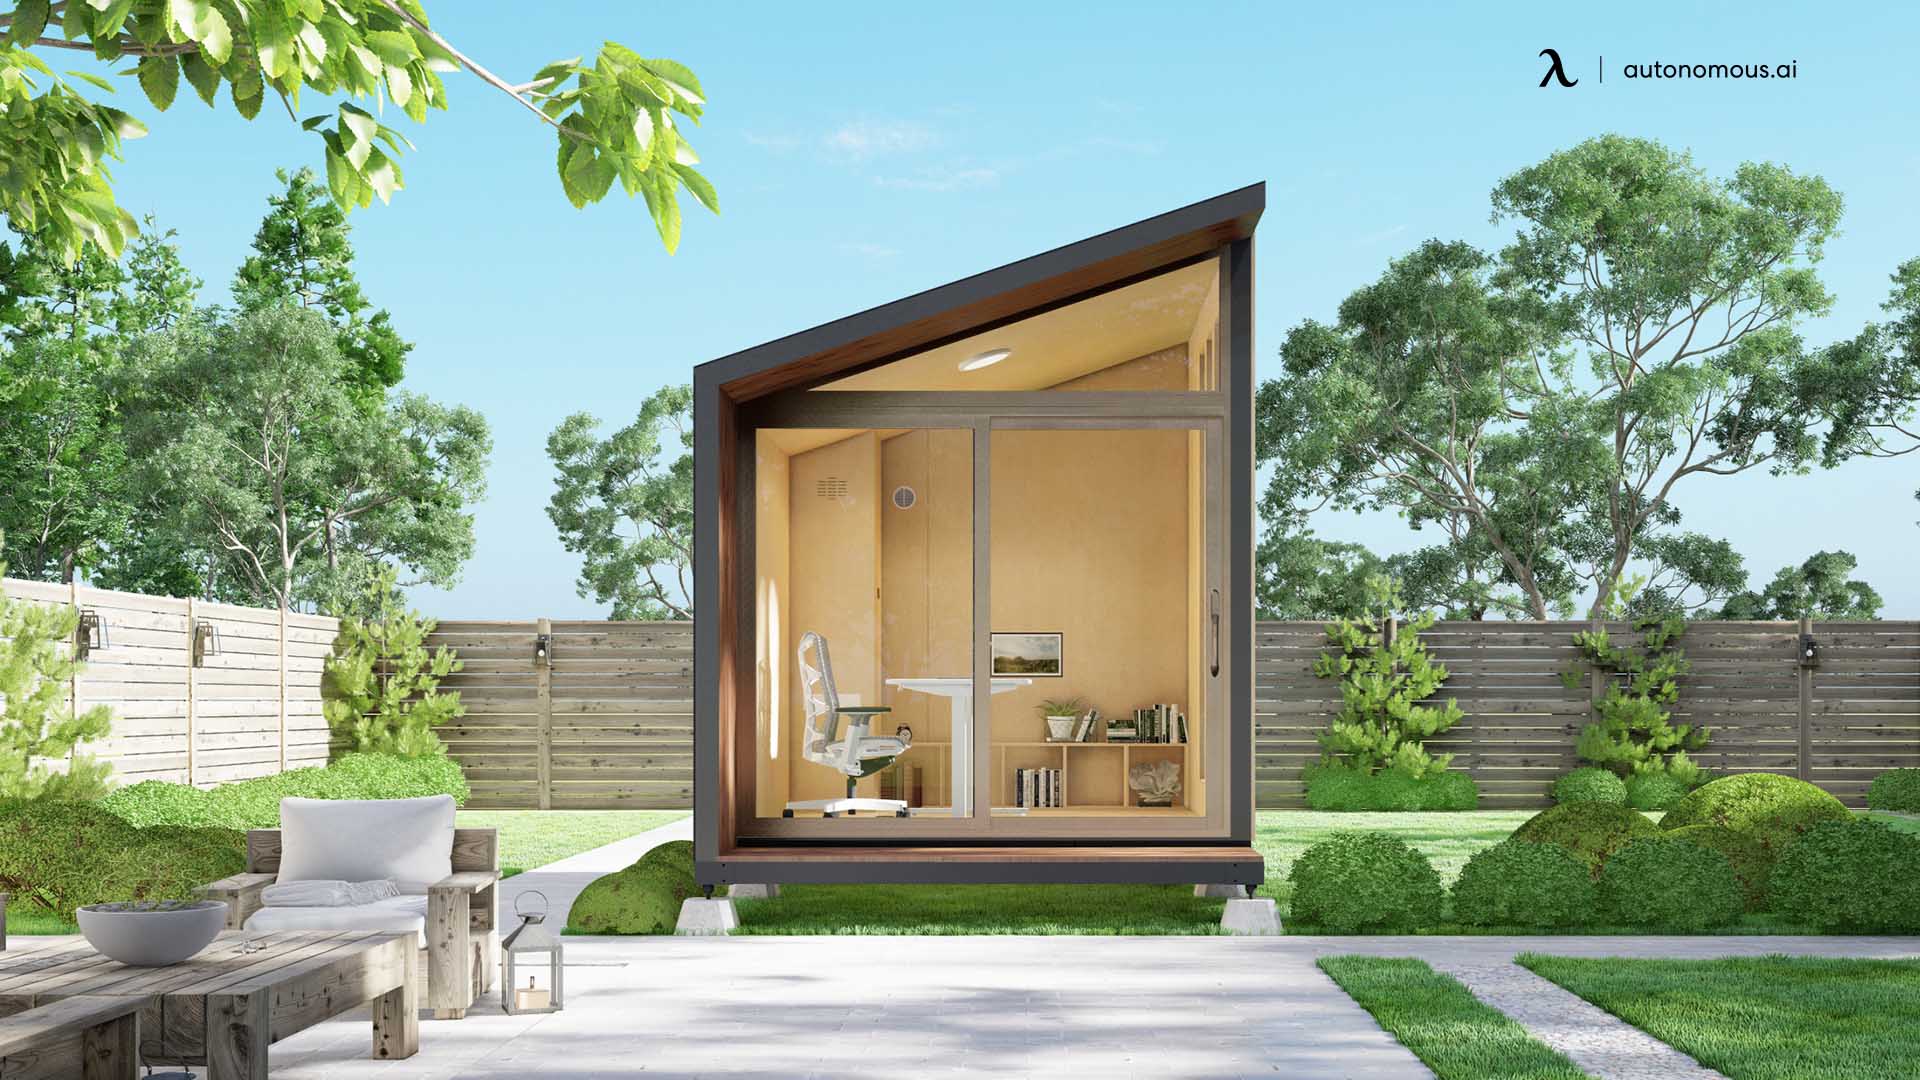 Home Office Kit - Prefab Garden Shed for Long-term Work from Home Needs